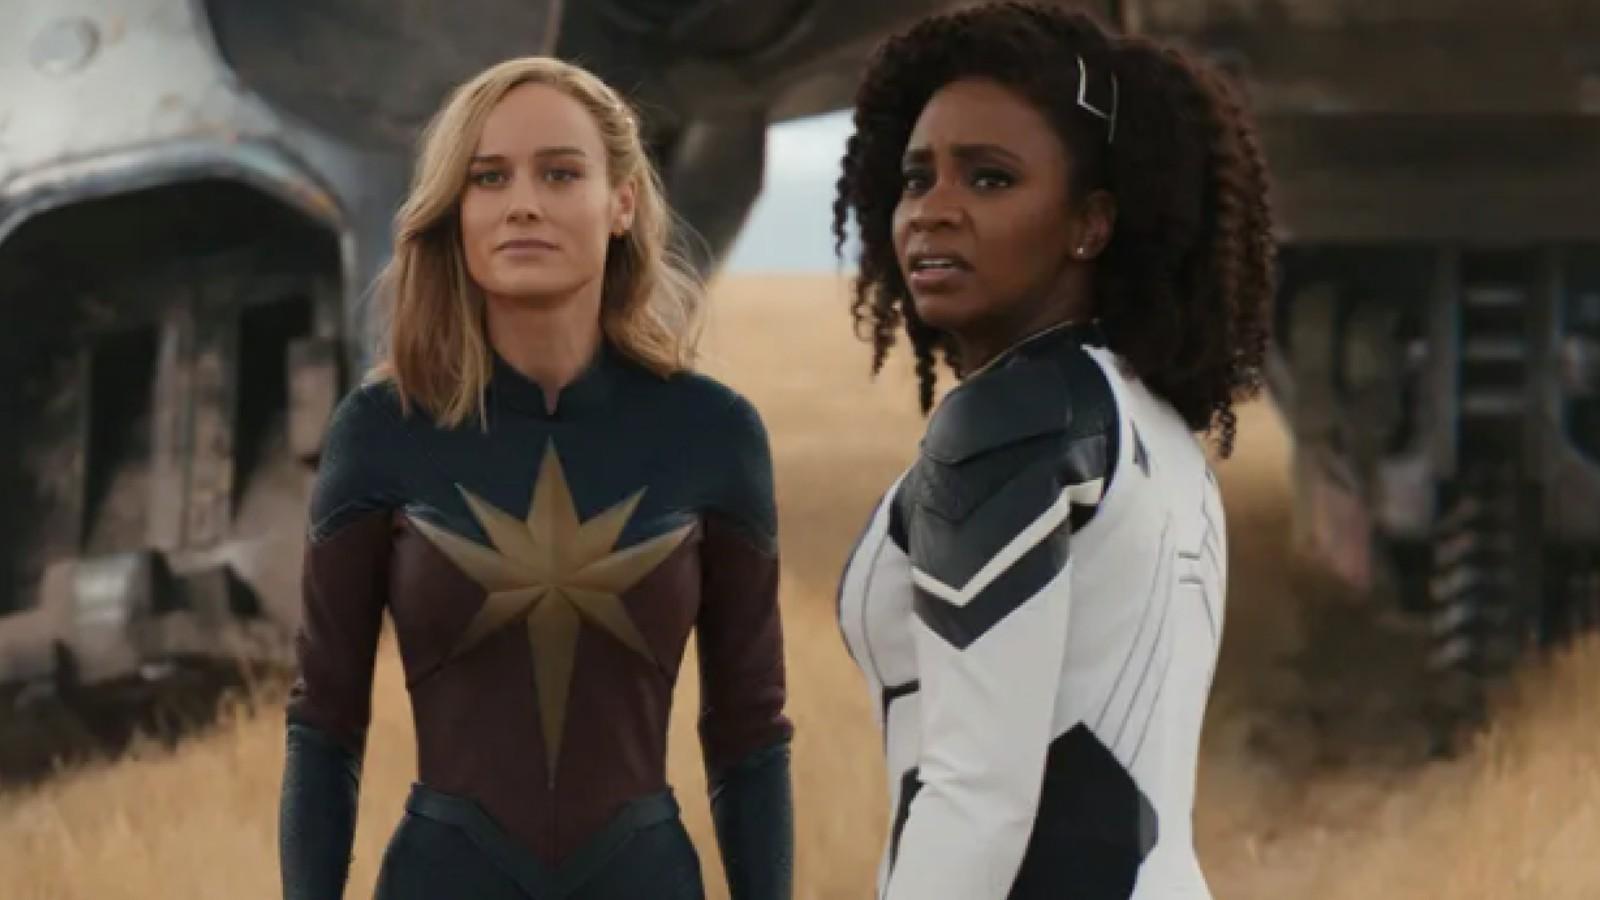 Brie Larson and Teyonah Parris in The Marvels